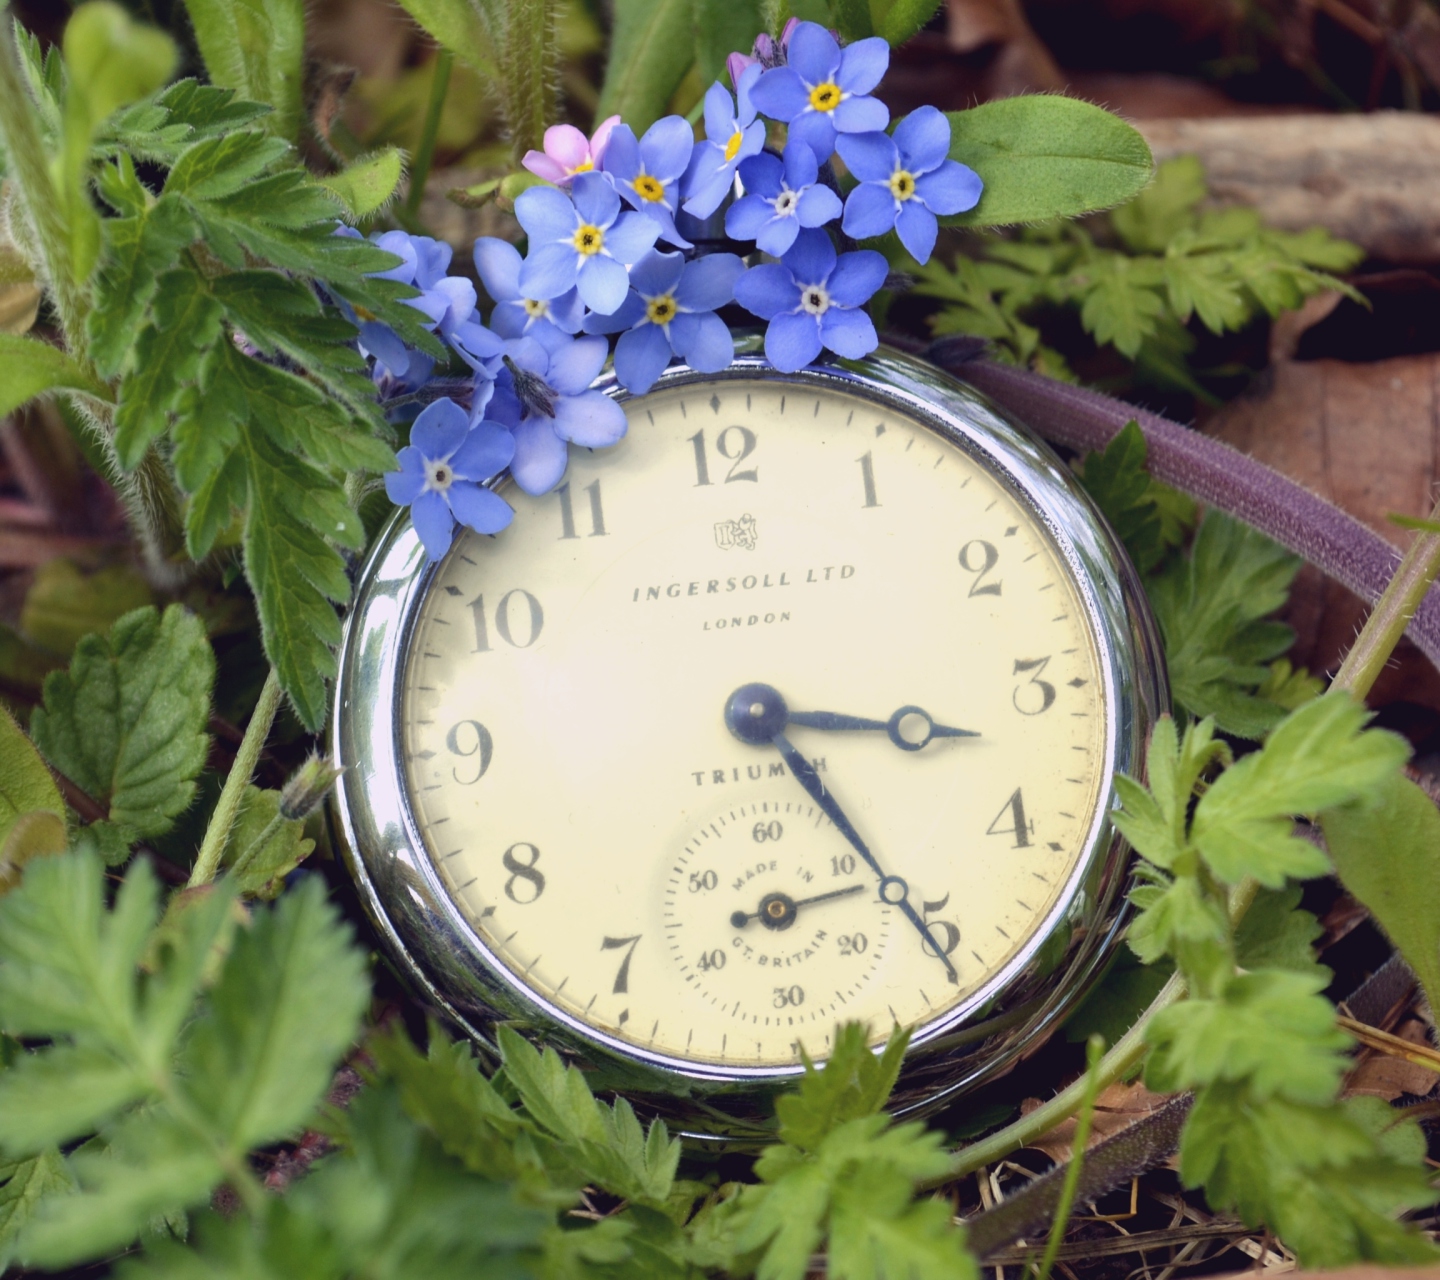 Vintage Watch And Little Blue Flowers wallpaper 1440x1280